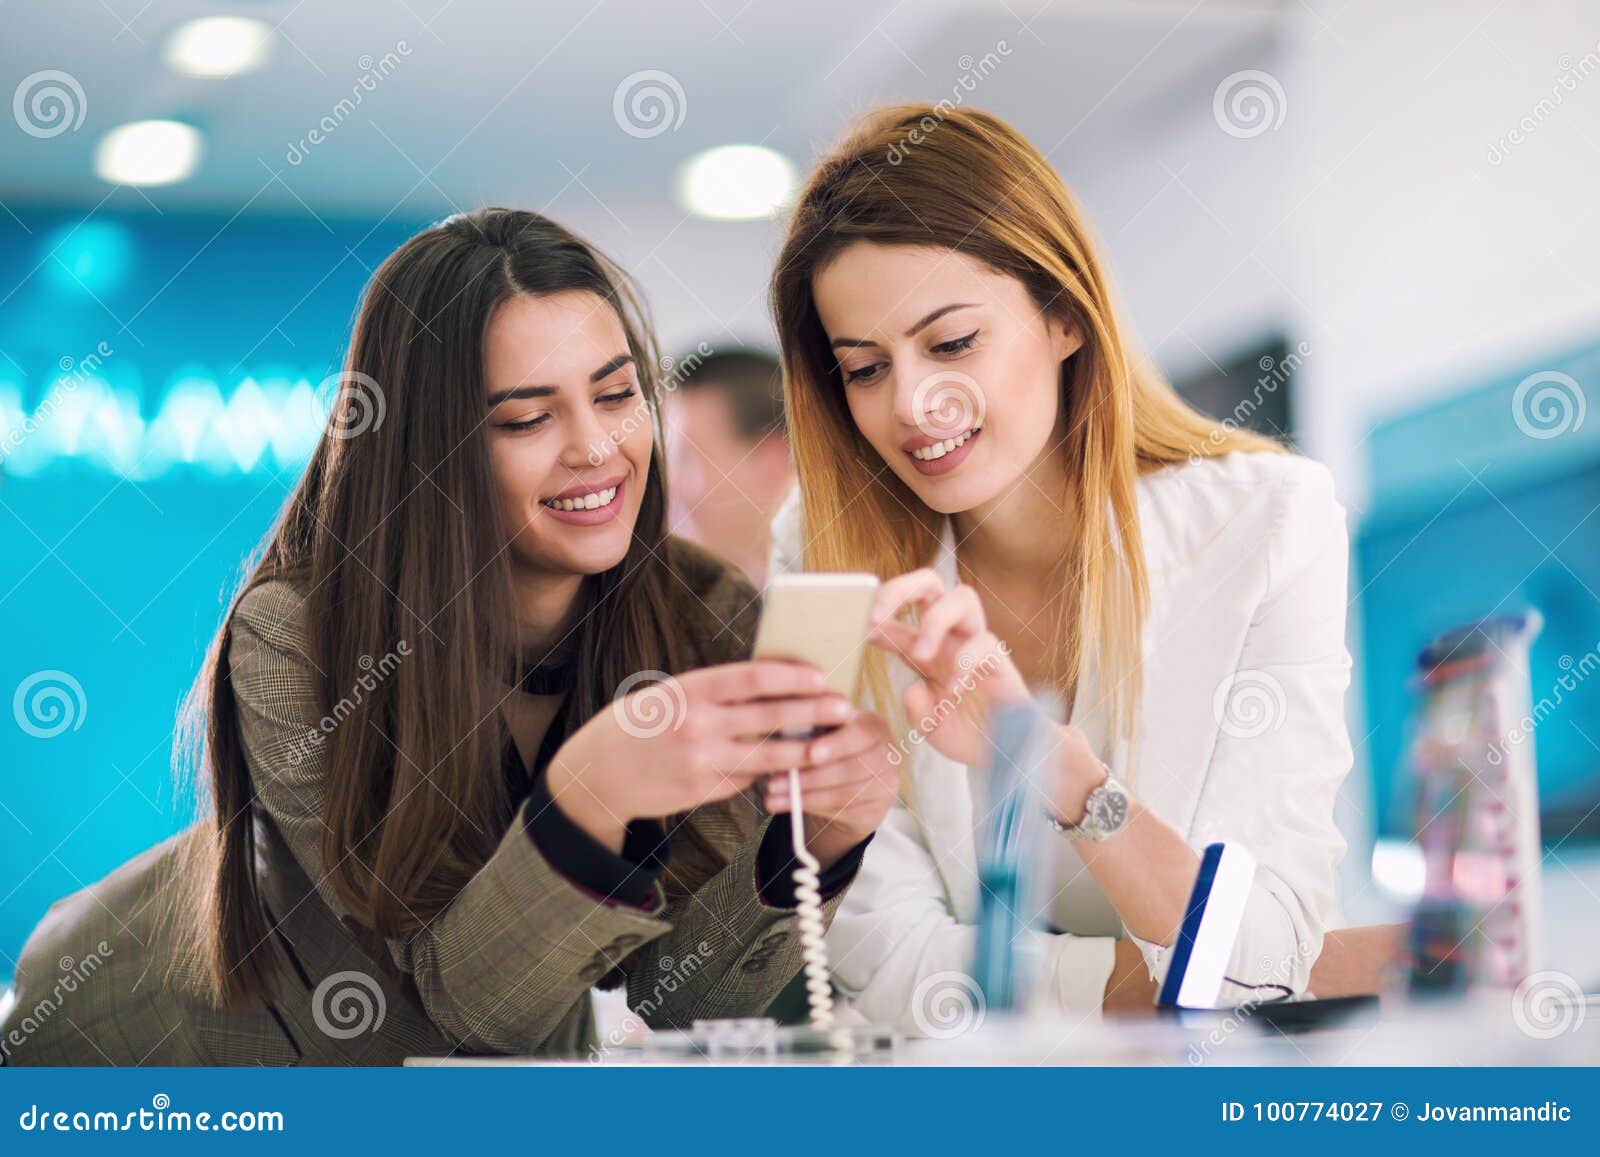 Two Women Holding a Mobile Phone in Store. Stock Image - Image of ...